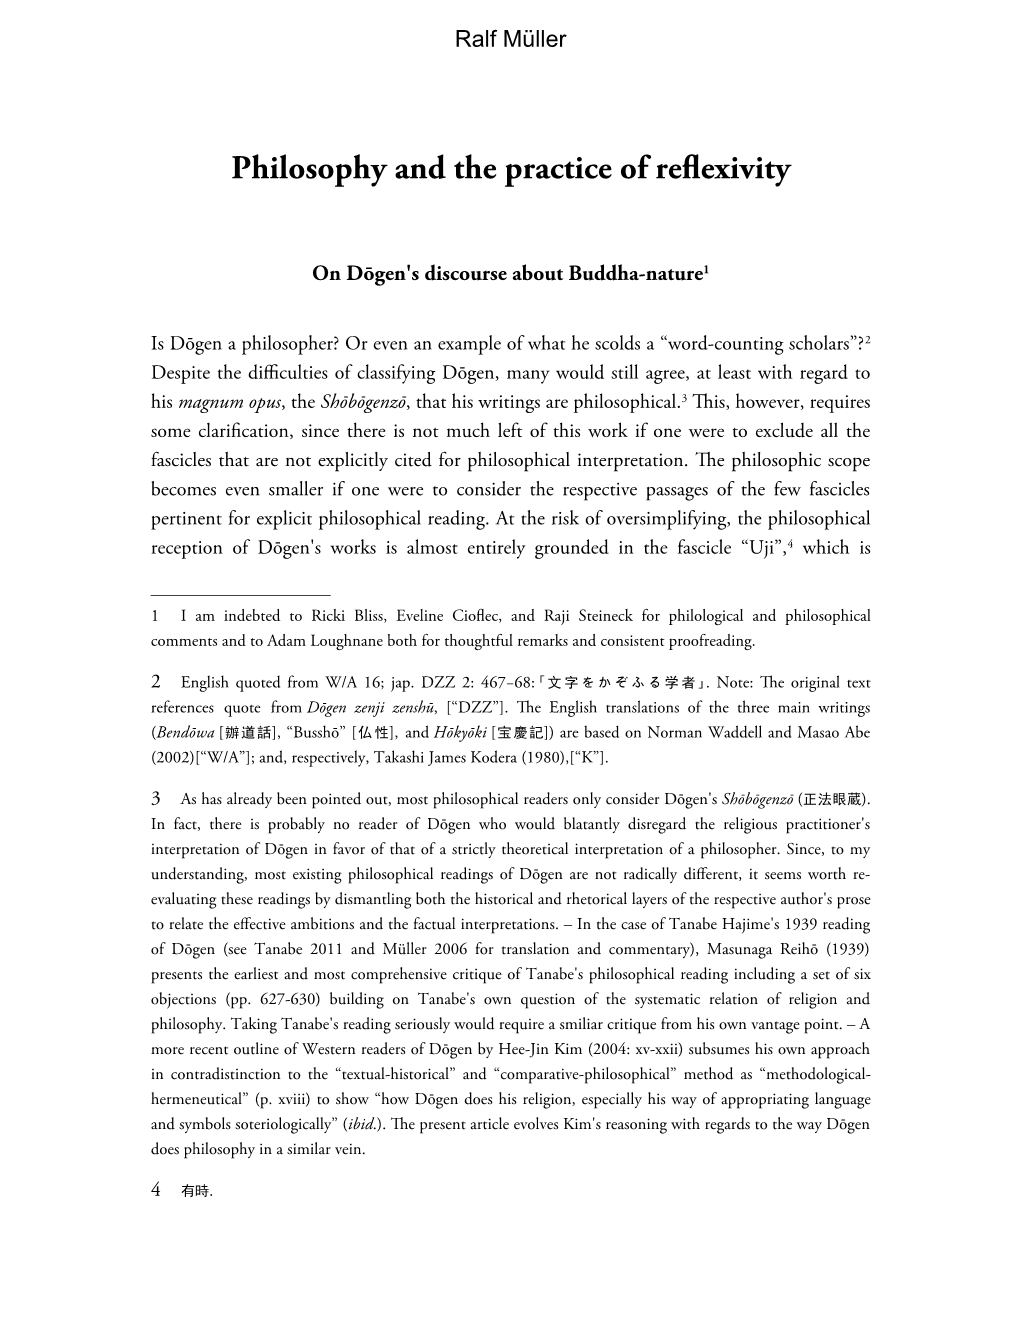 Philosophy and the Practice of Reflexivity